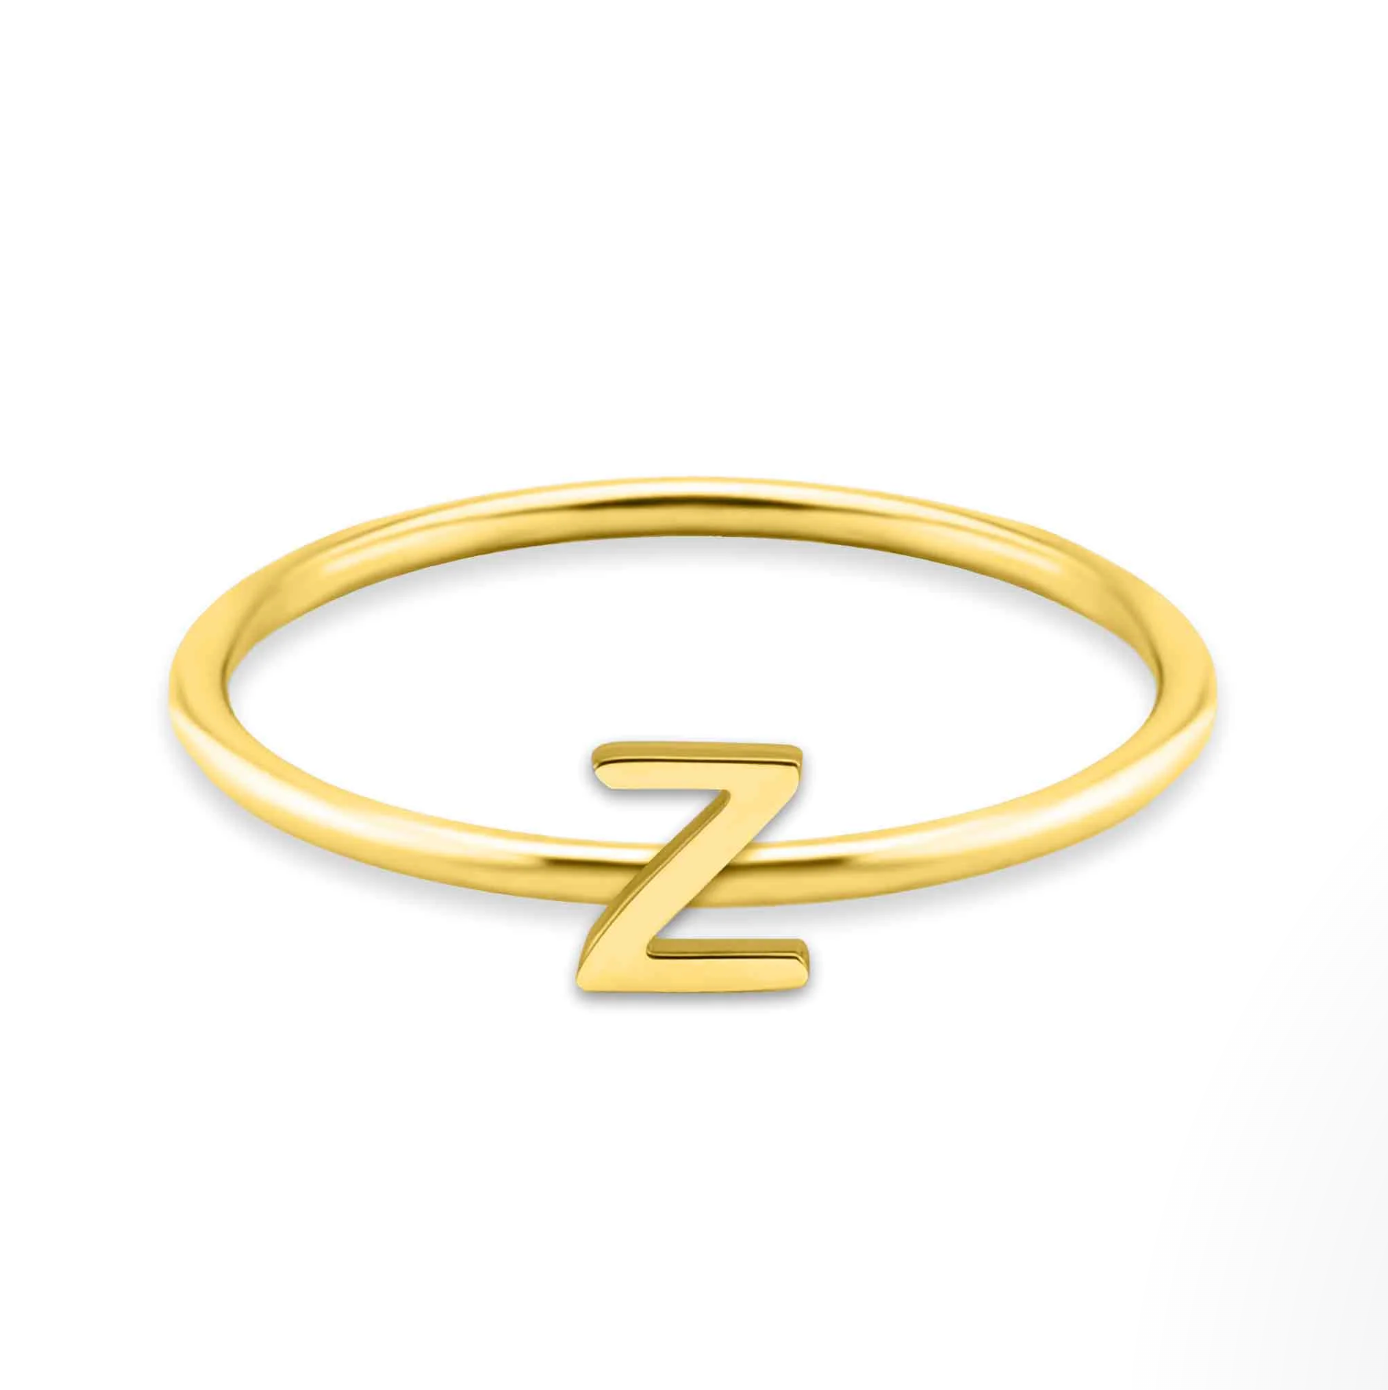 Costum Old English Initial Letter Ring Jewelry Free shipping|Simply Bo